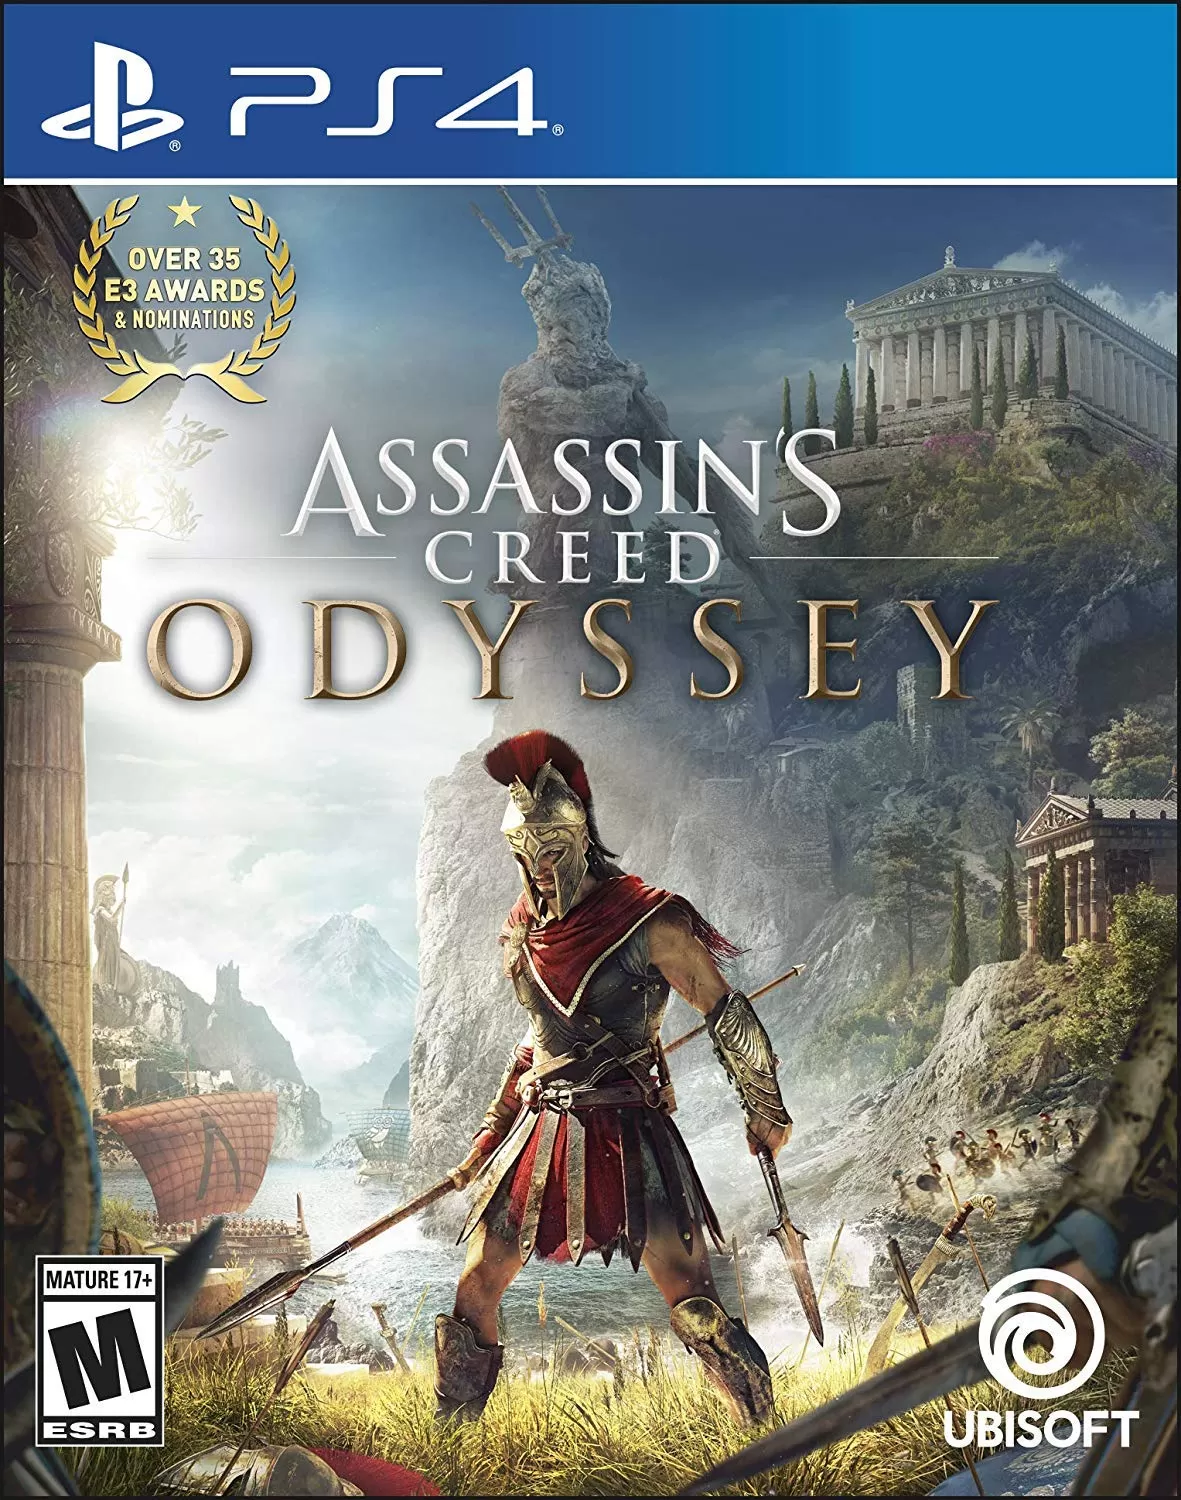 Assassin's creed odyssey standard edition - ps4